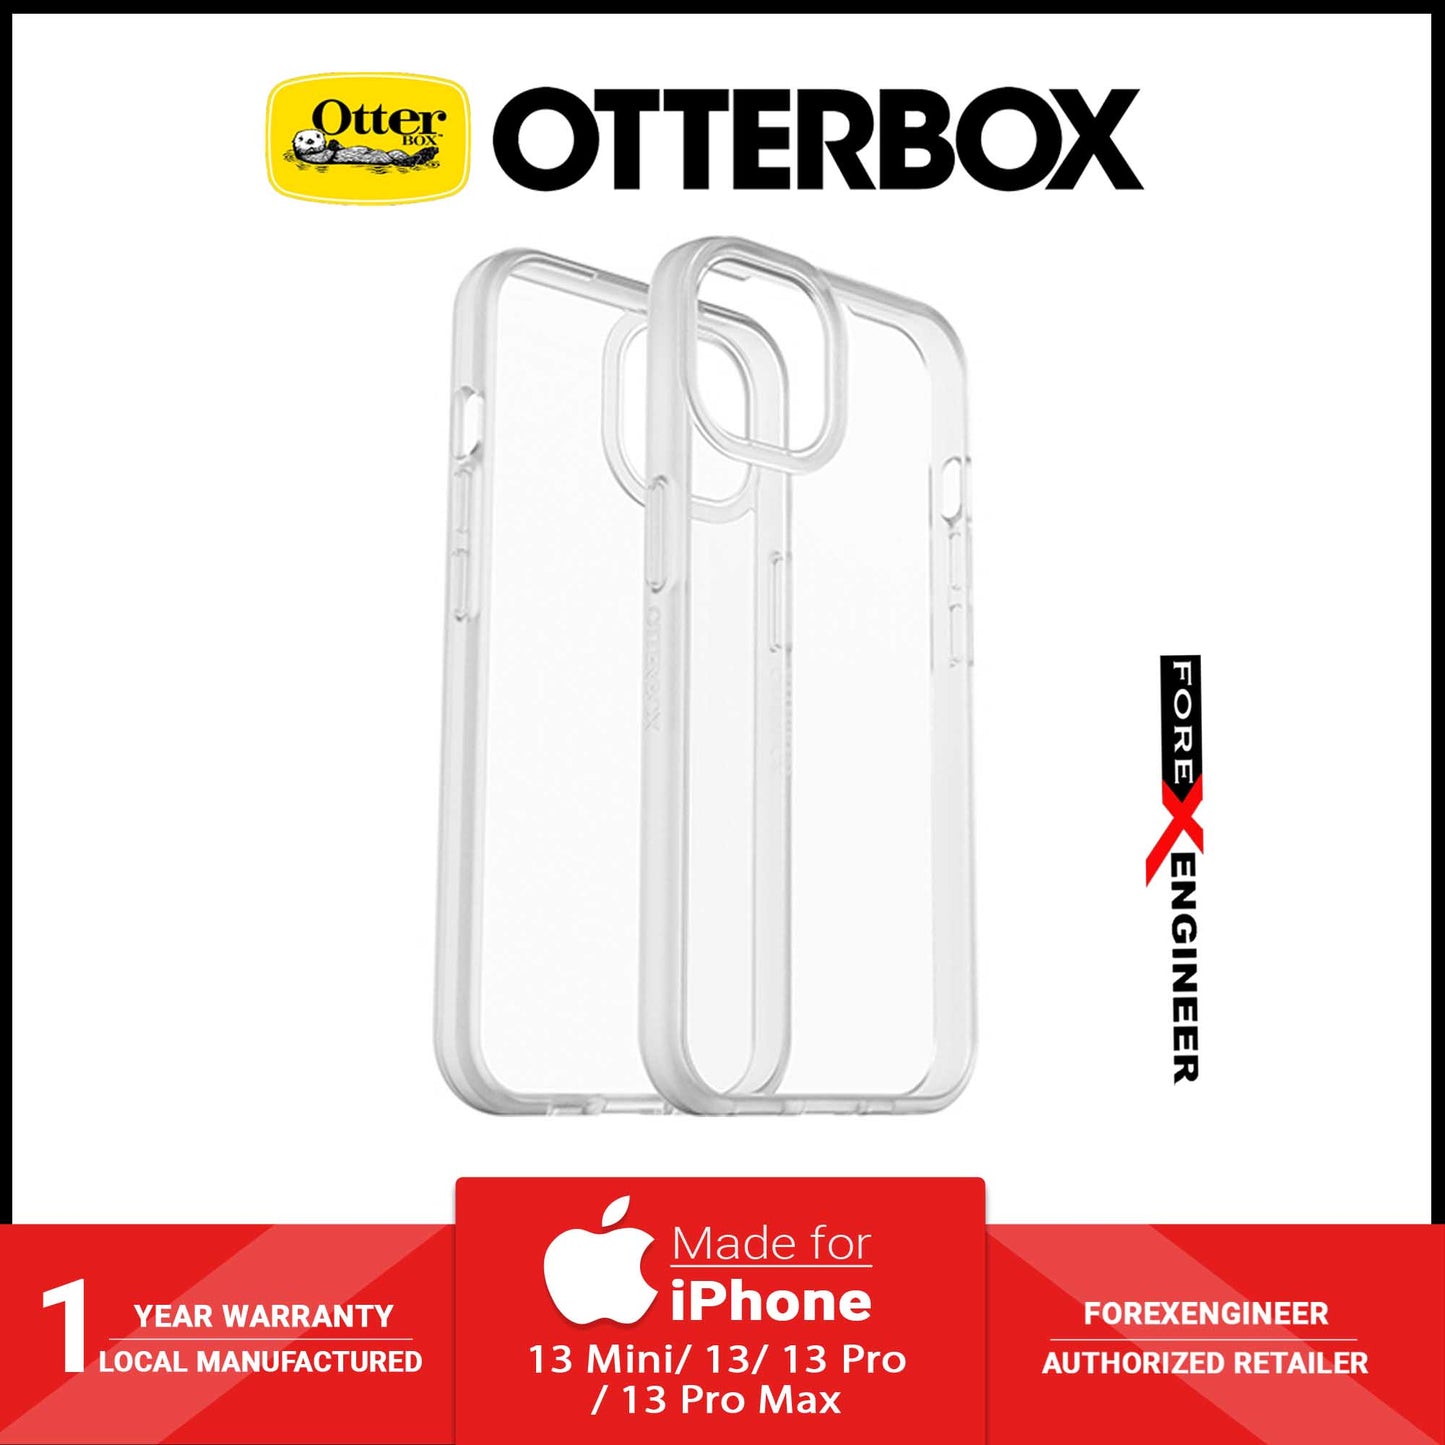 Otterbox React for iPhone 13 Mini 5.4" 5G - Clear (Barcode: 840104287194)